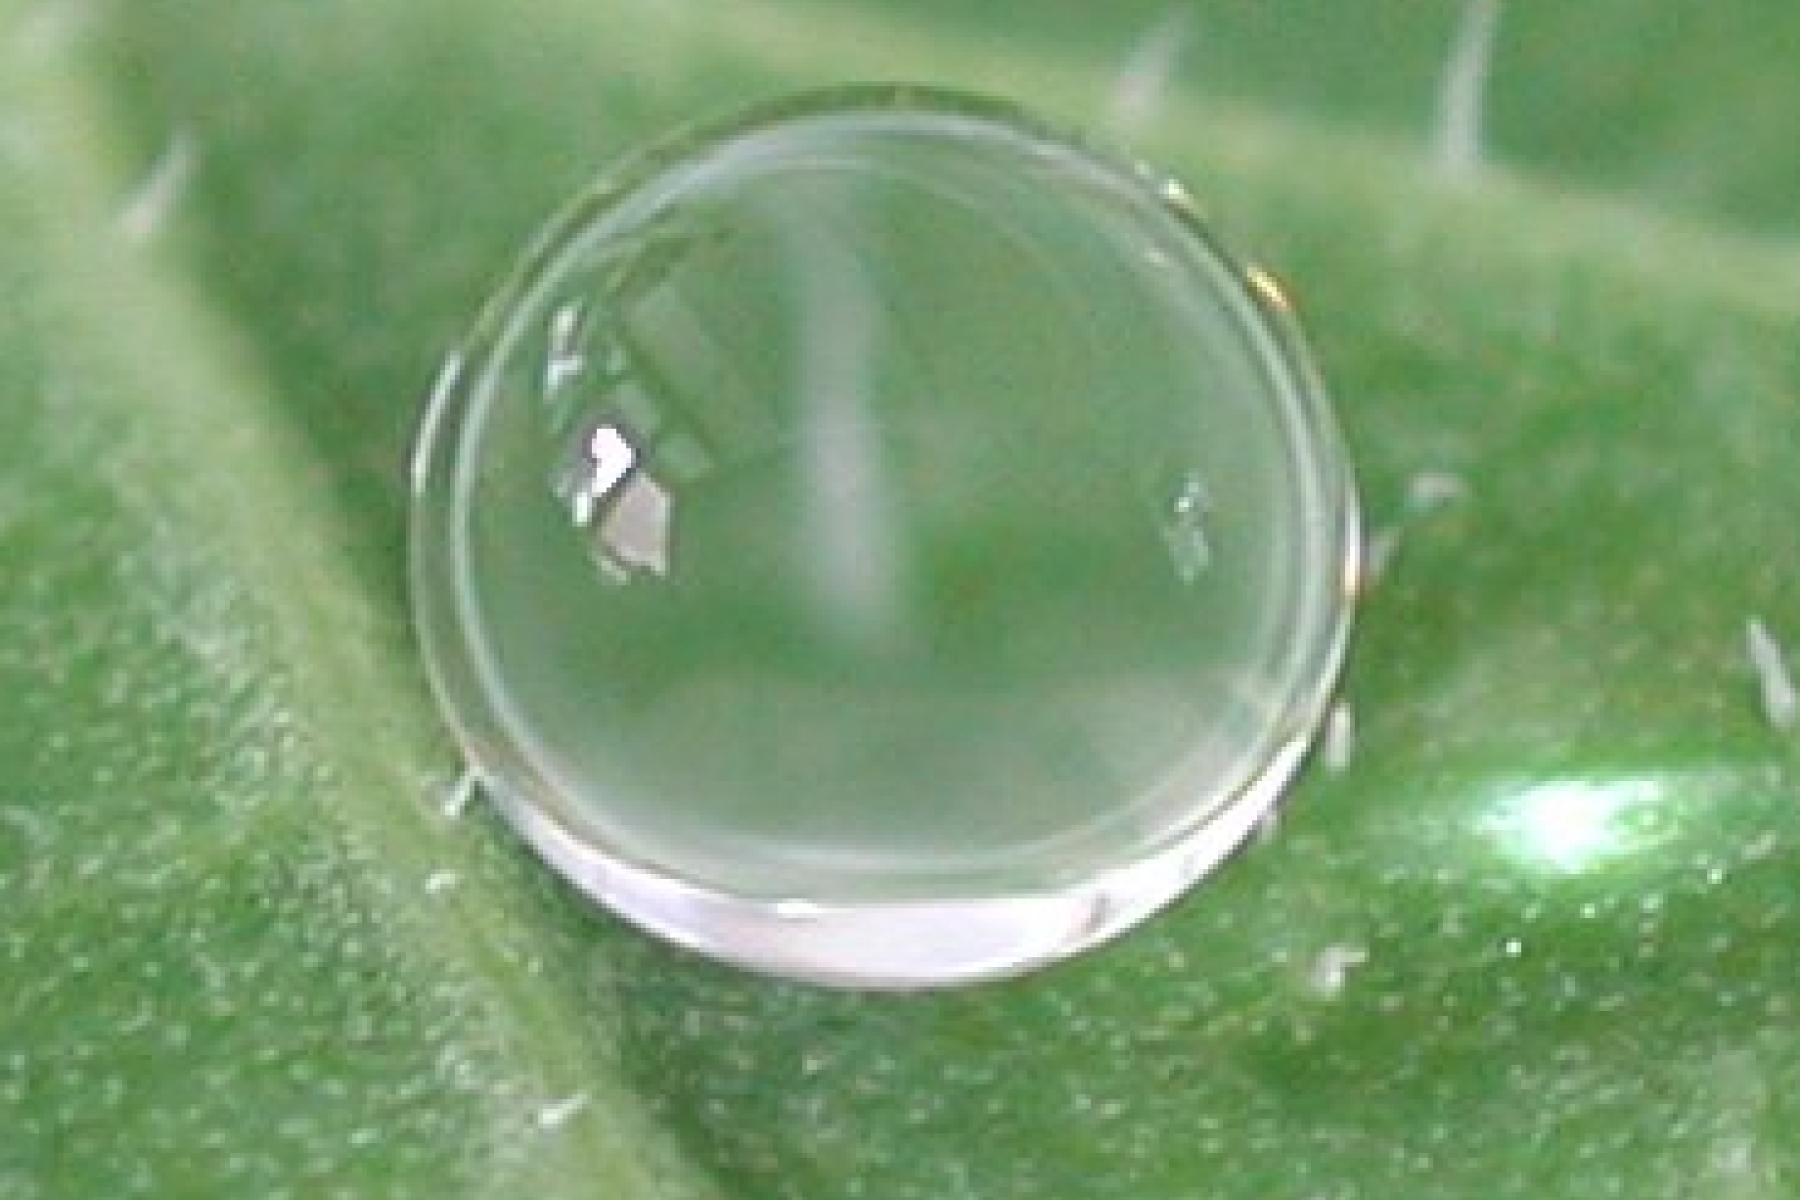 A water droplet sits on a superhydrophic leaf forming an almost perfect sphere of water.